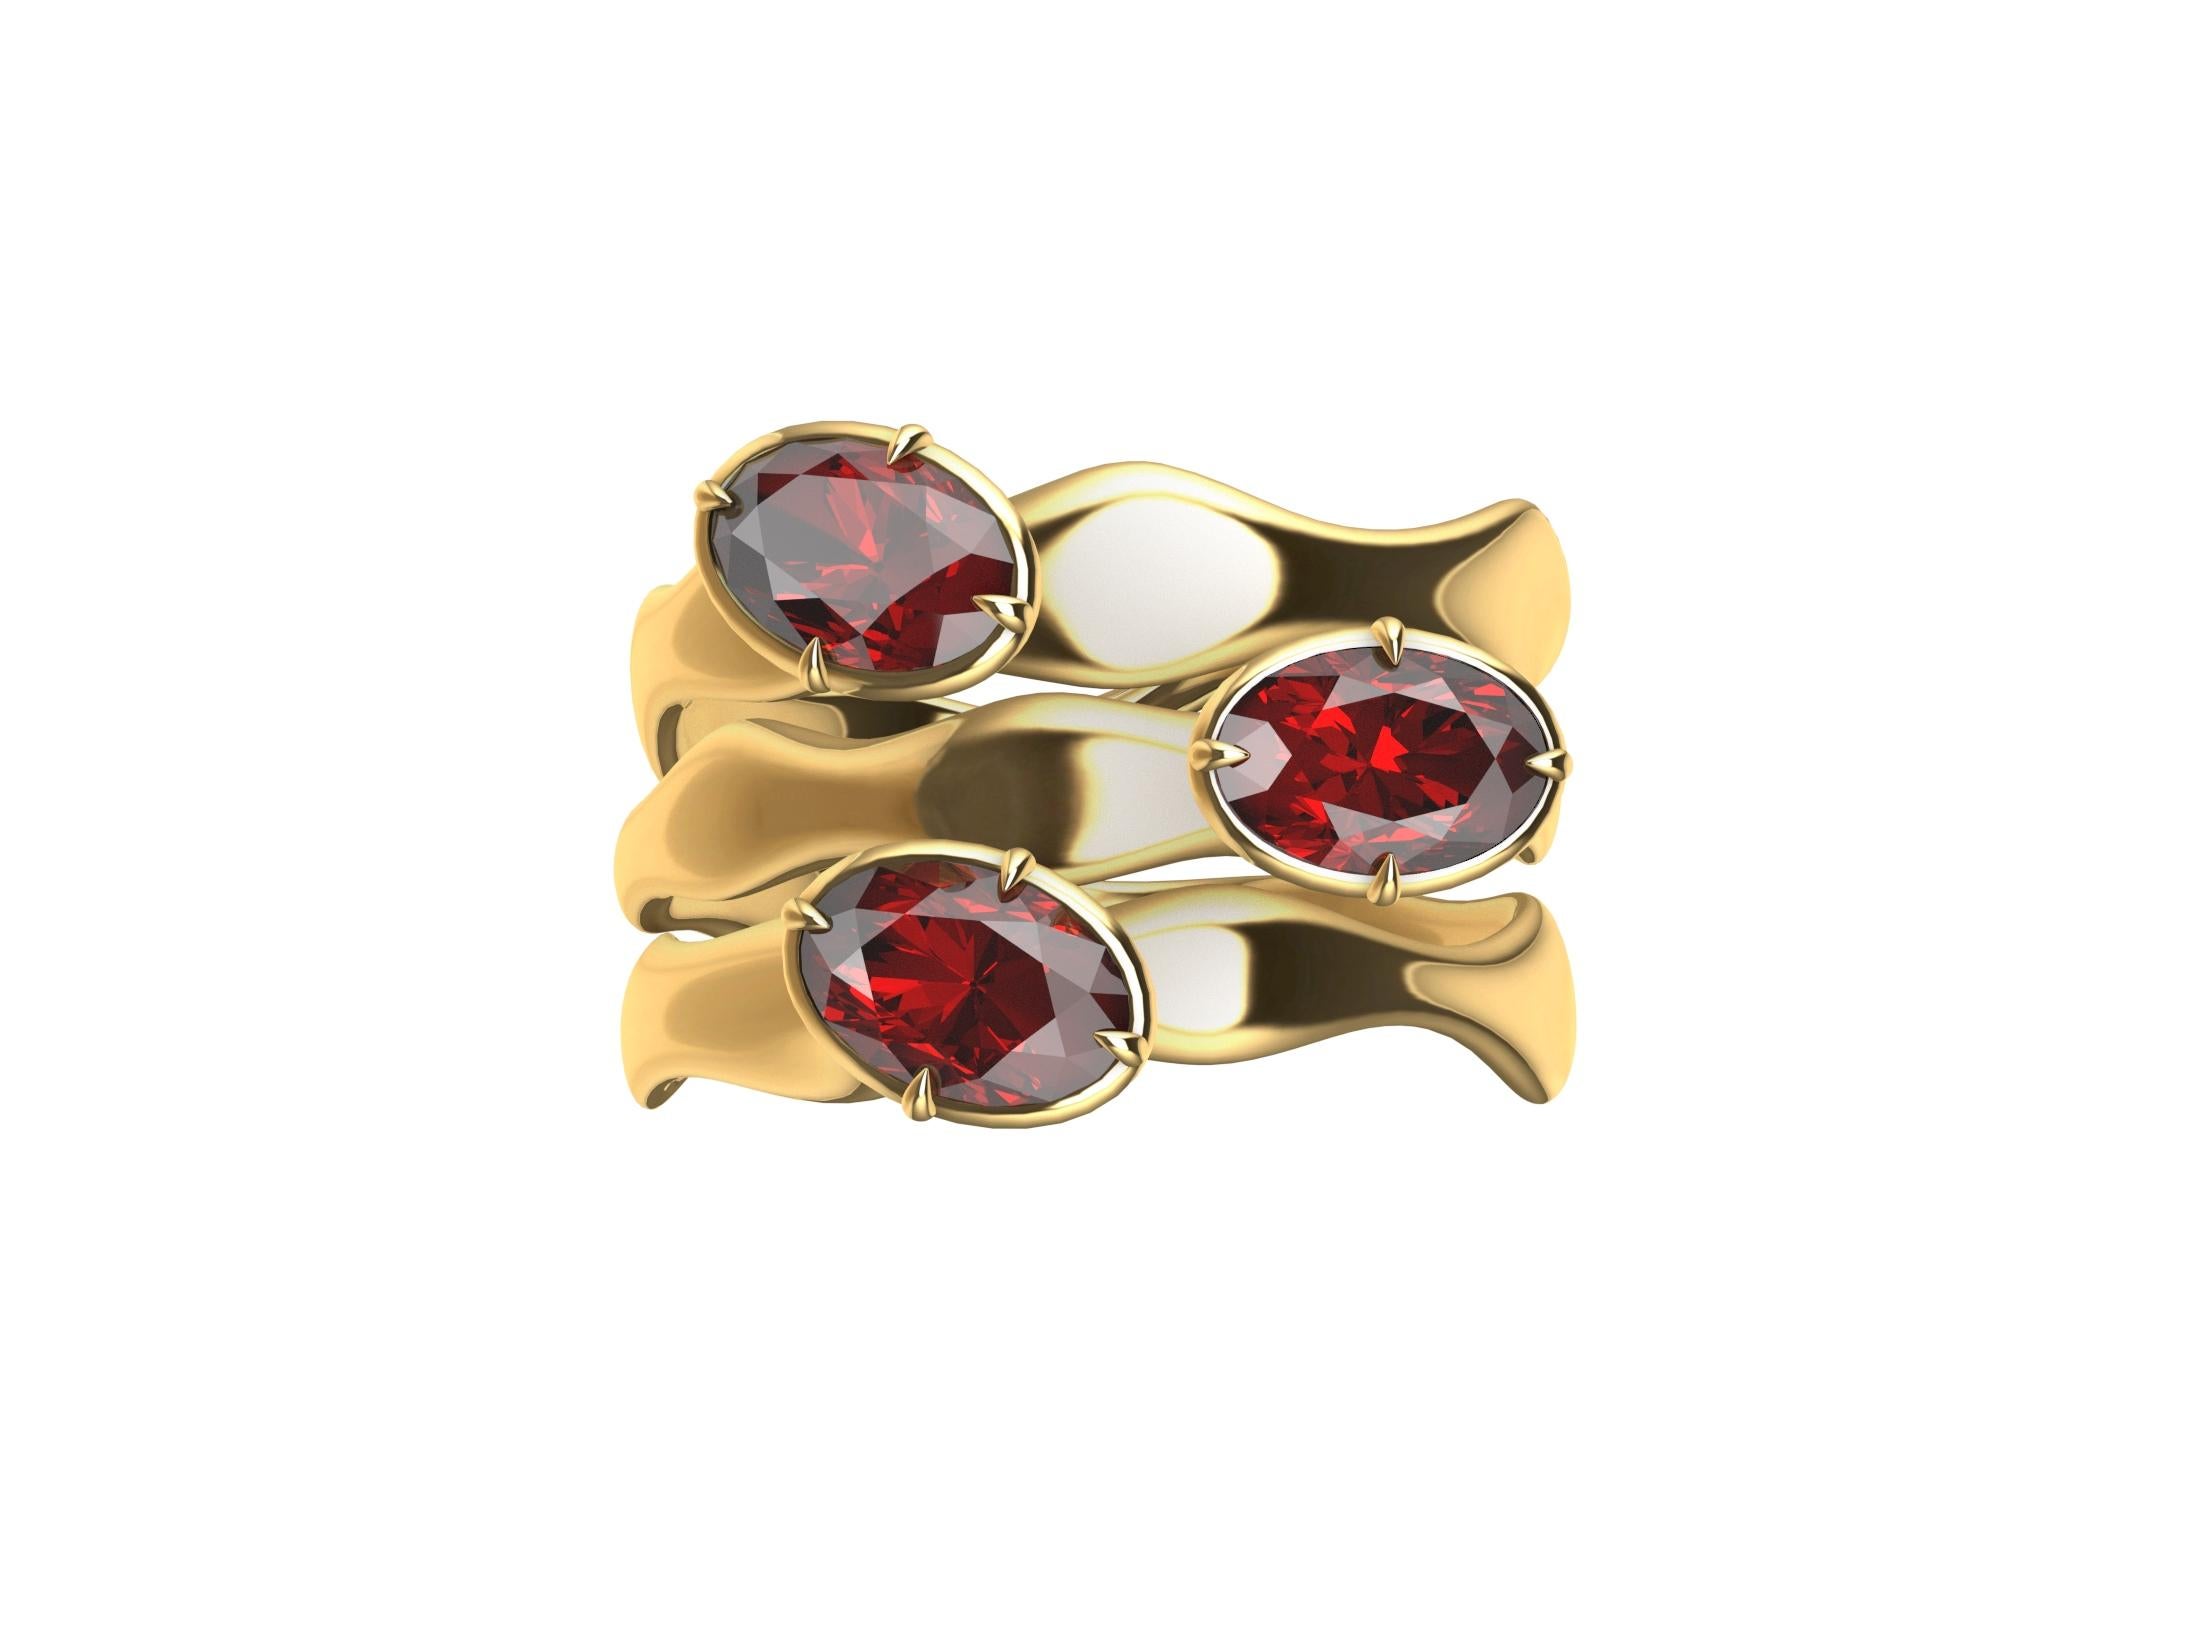 Thomas Kurilla , Tiffany designer is always inspired by plants and leaves. This ring came from such drawings.
1.8 carats rubies.  Organic undulating lines for a sexy ring. Made to order in NYC , please allow 3-4 weeks .
